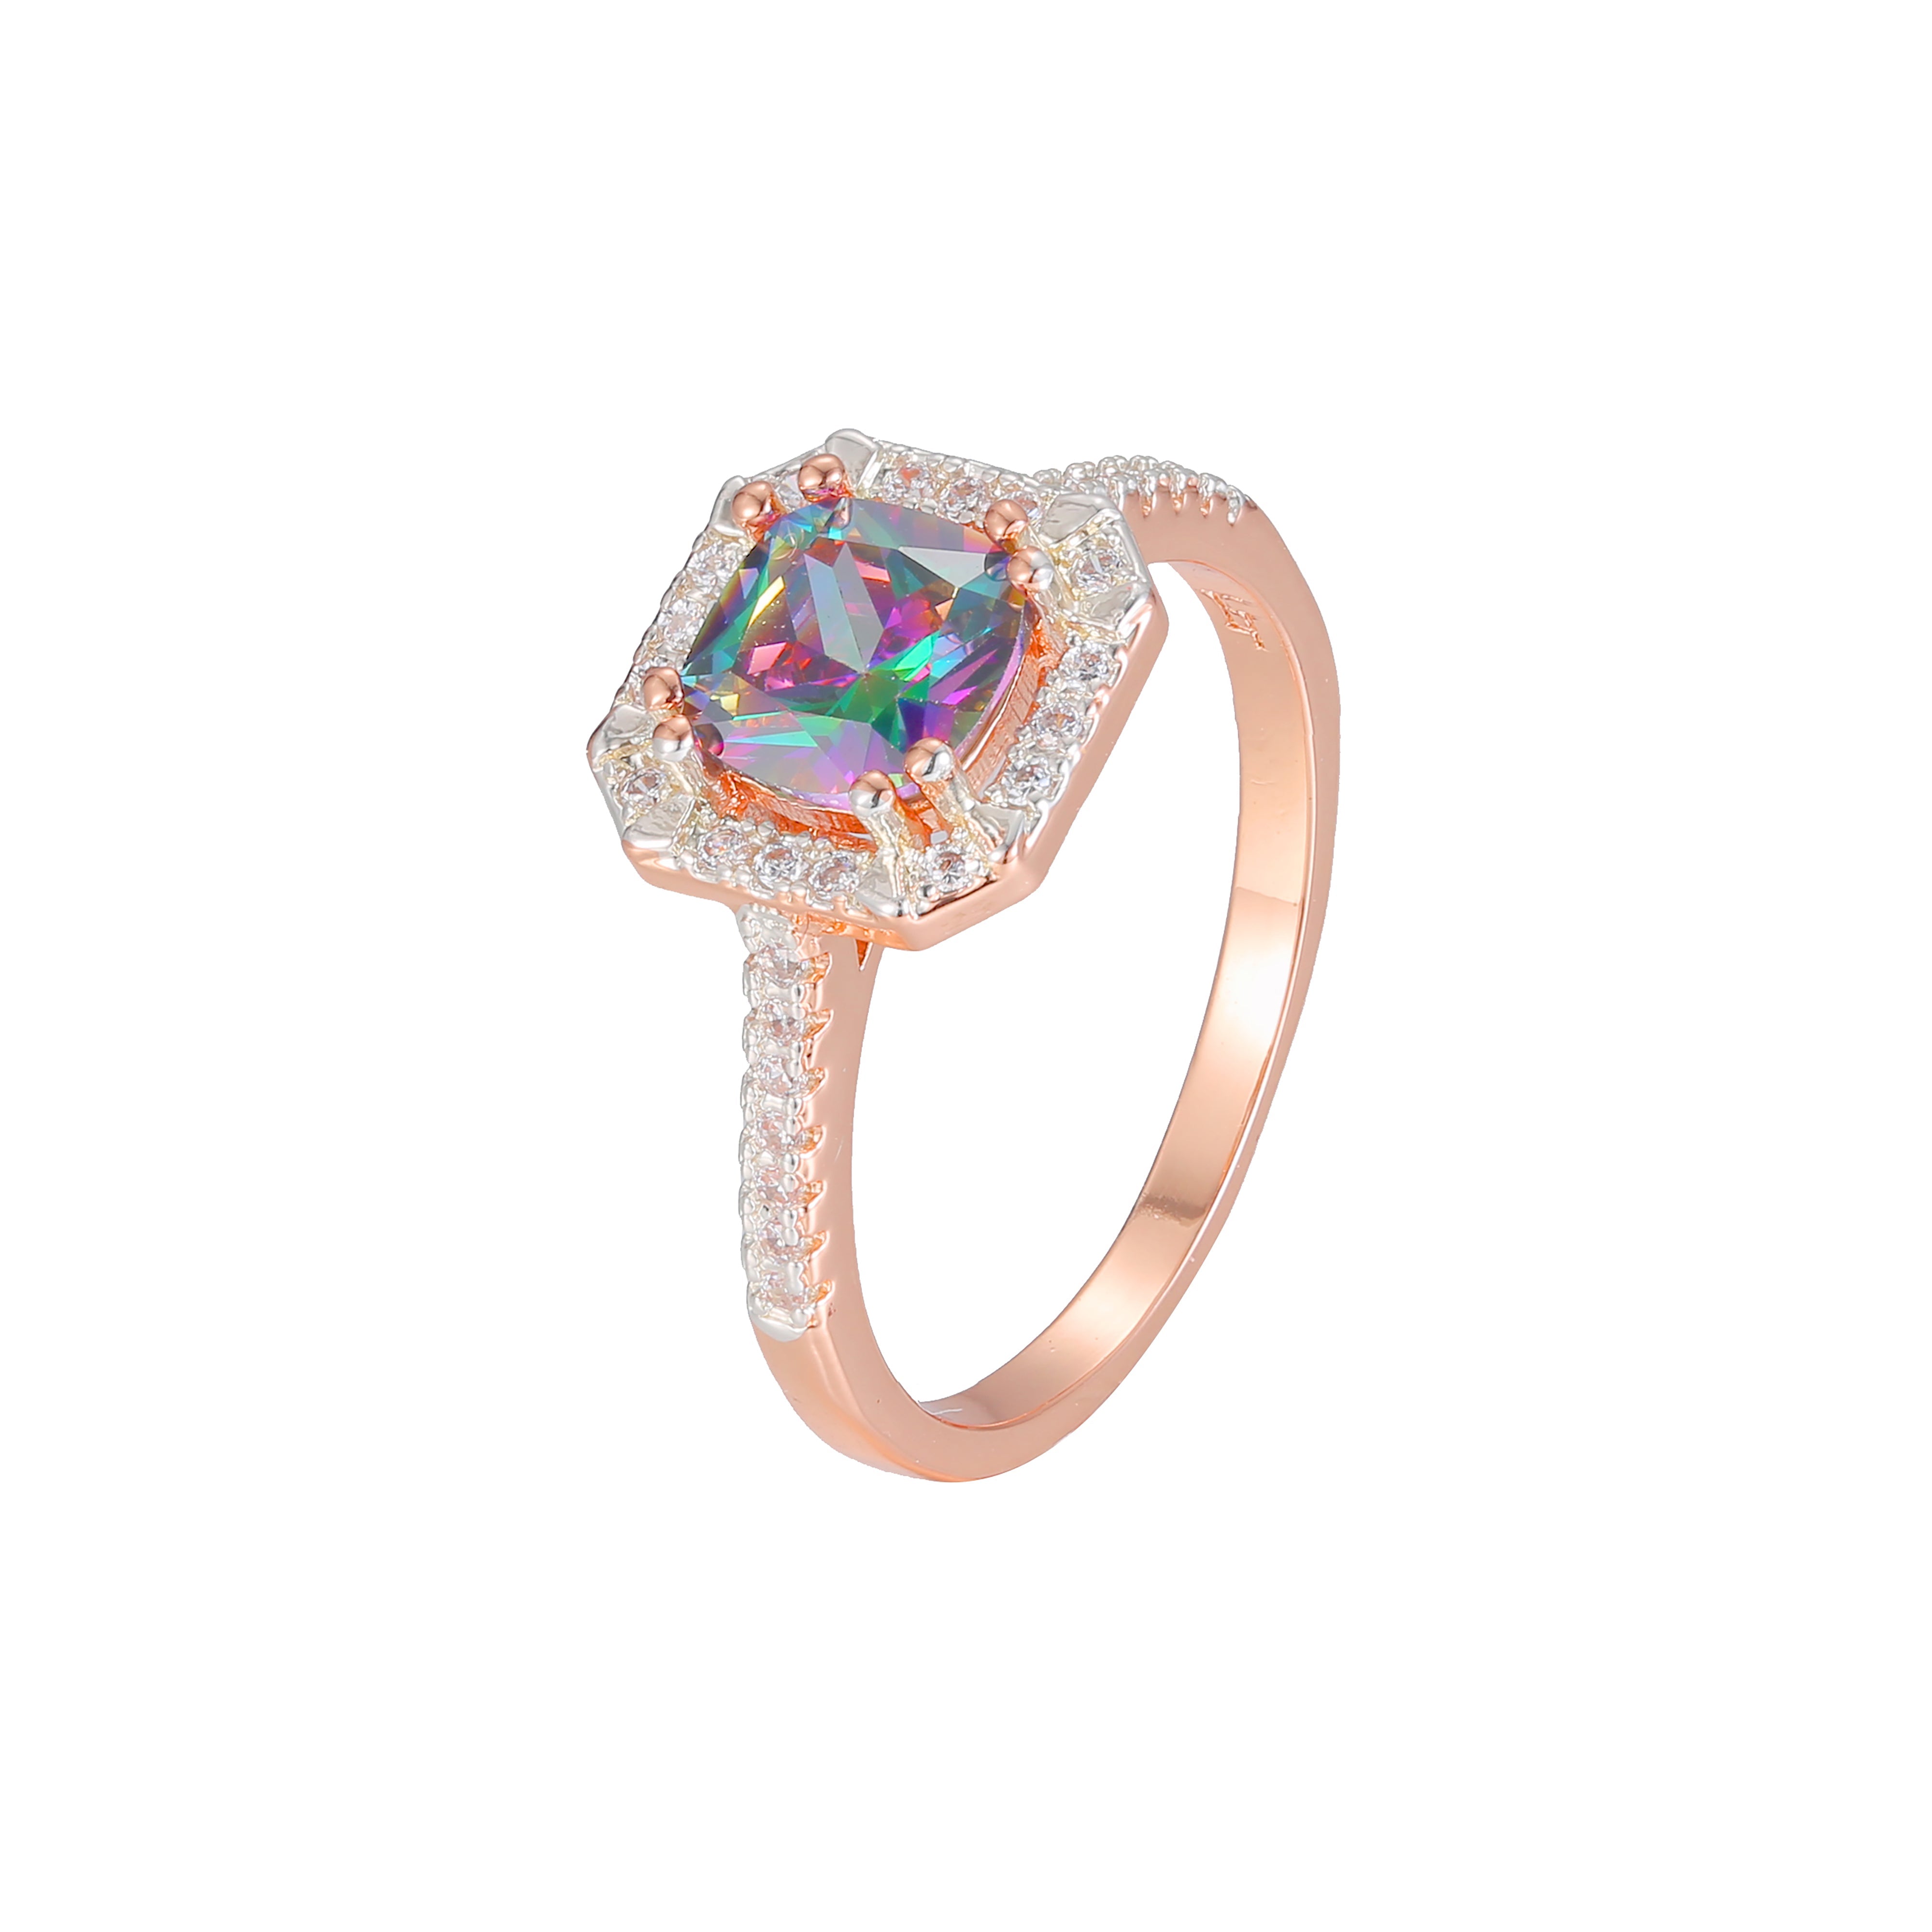 Colorful solitaire halo rings plated in Rose Gold